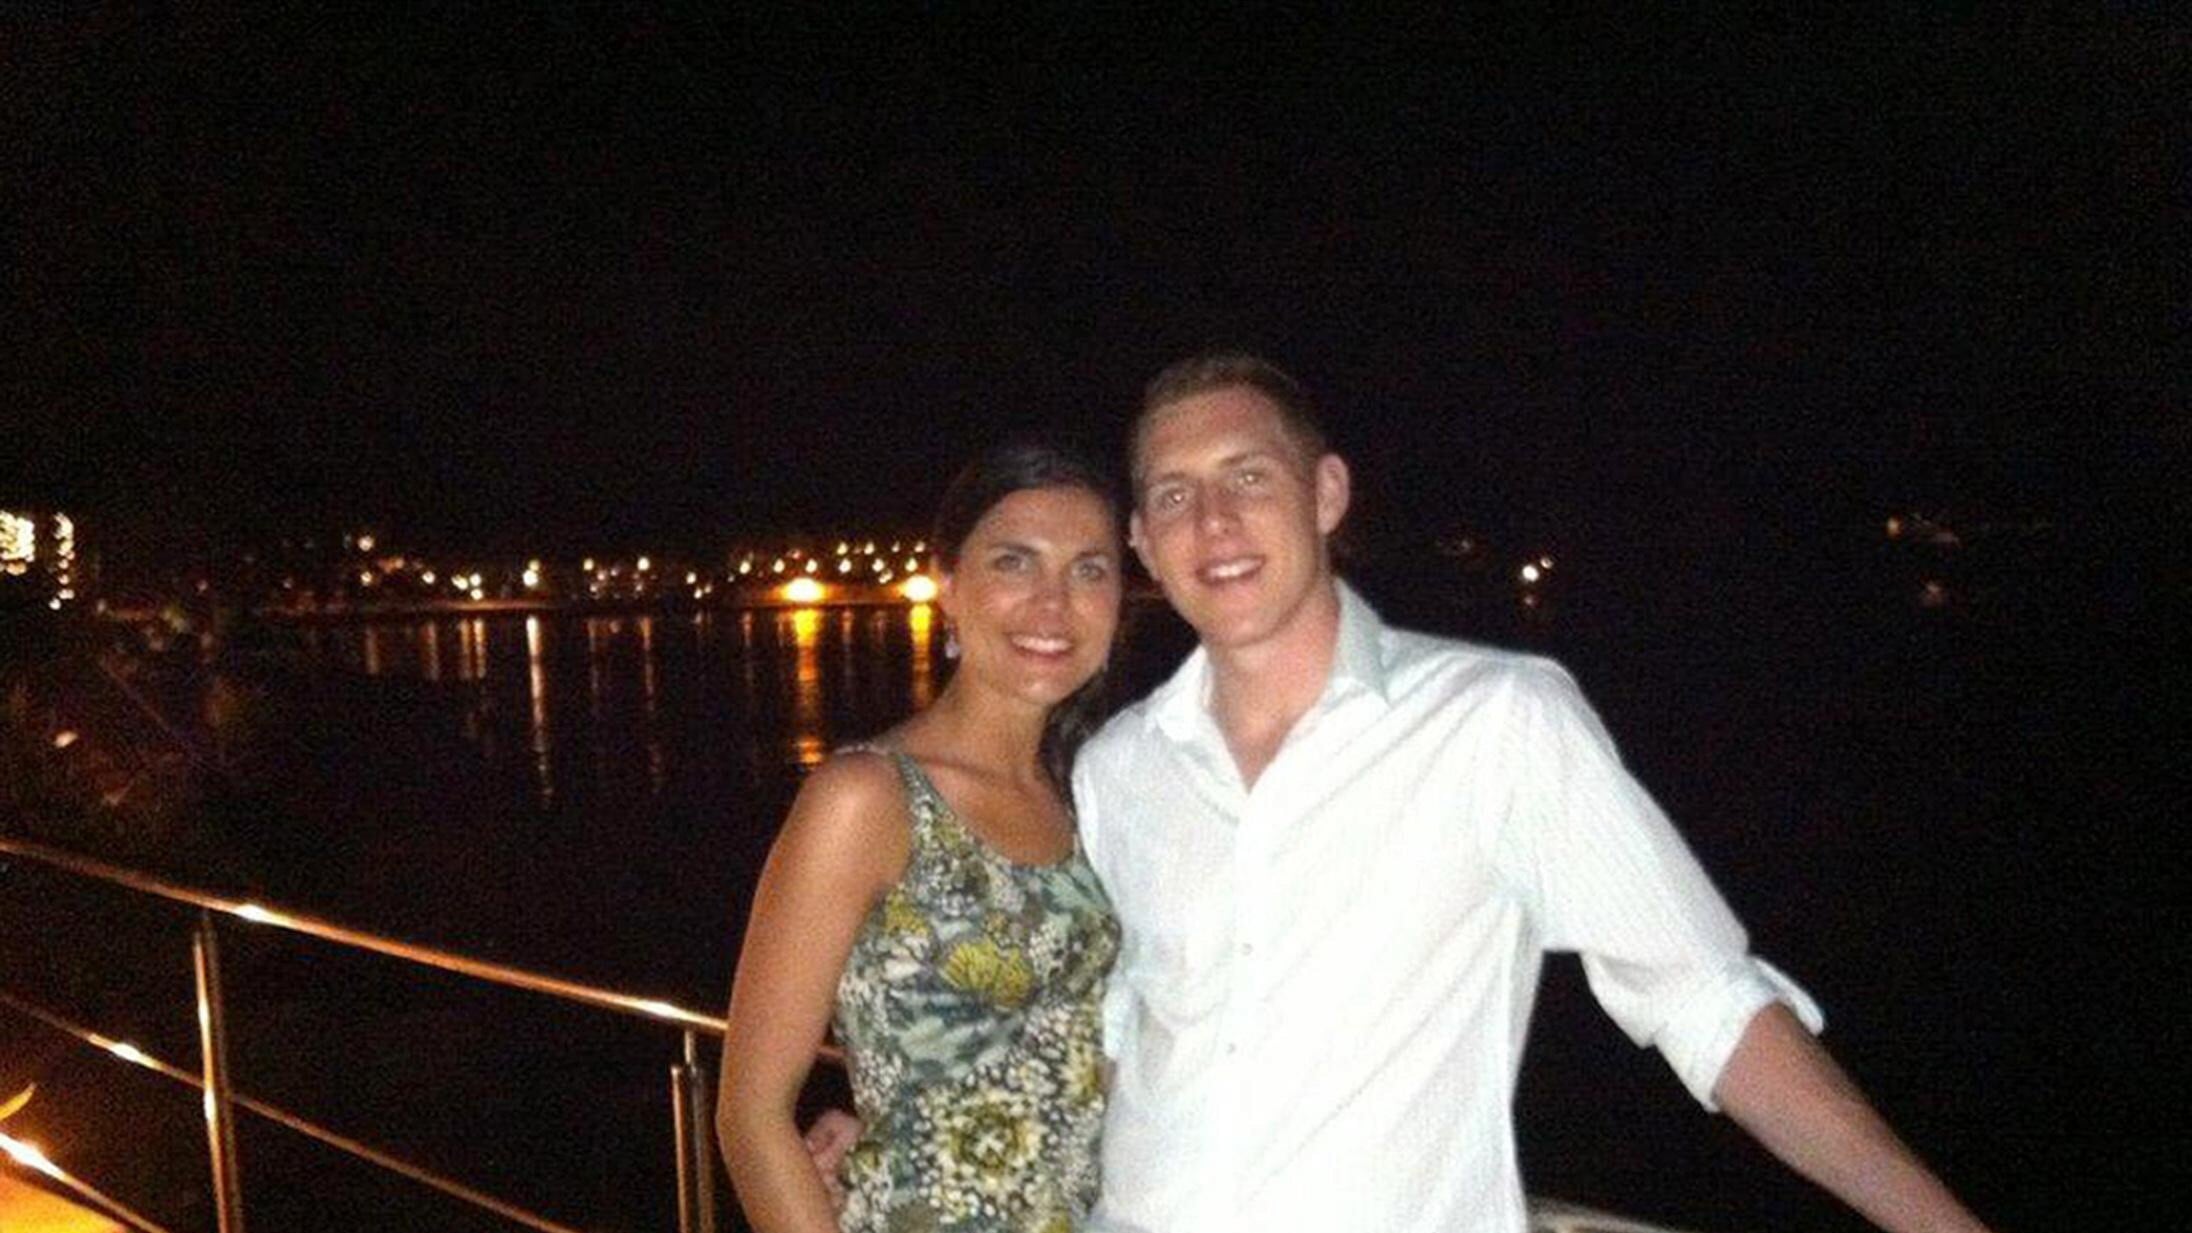 John and Michaela McAreavey during their honeymoon in 2011 (Family handout/PA)